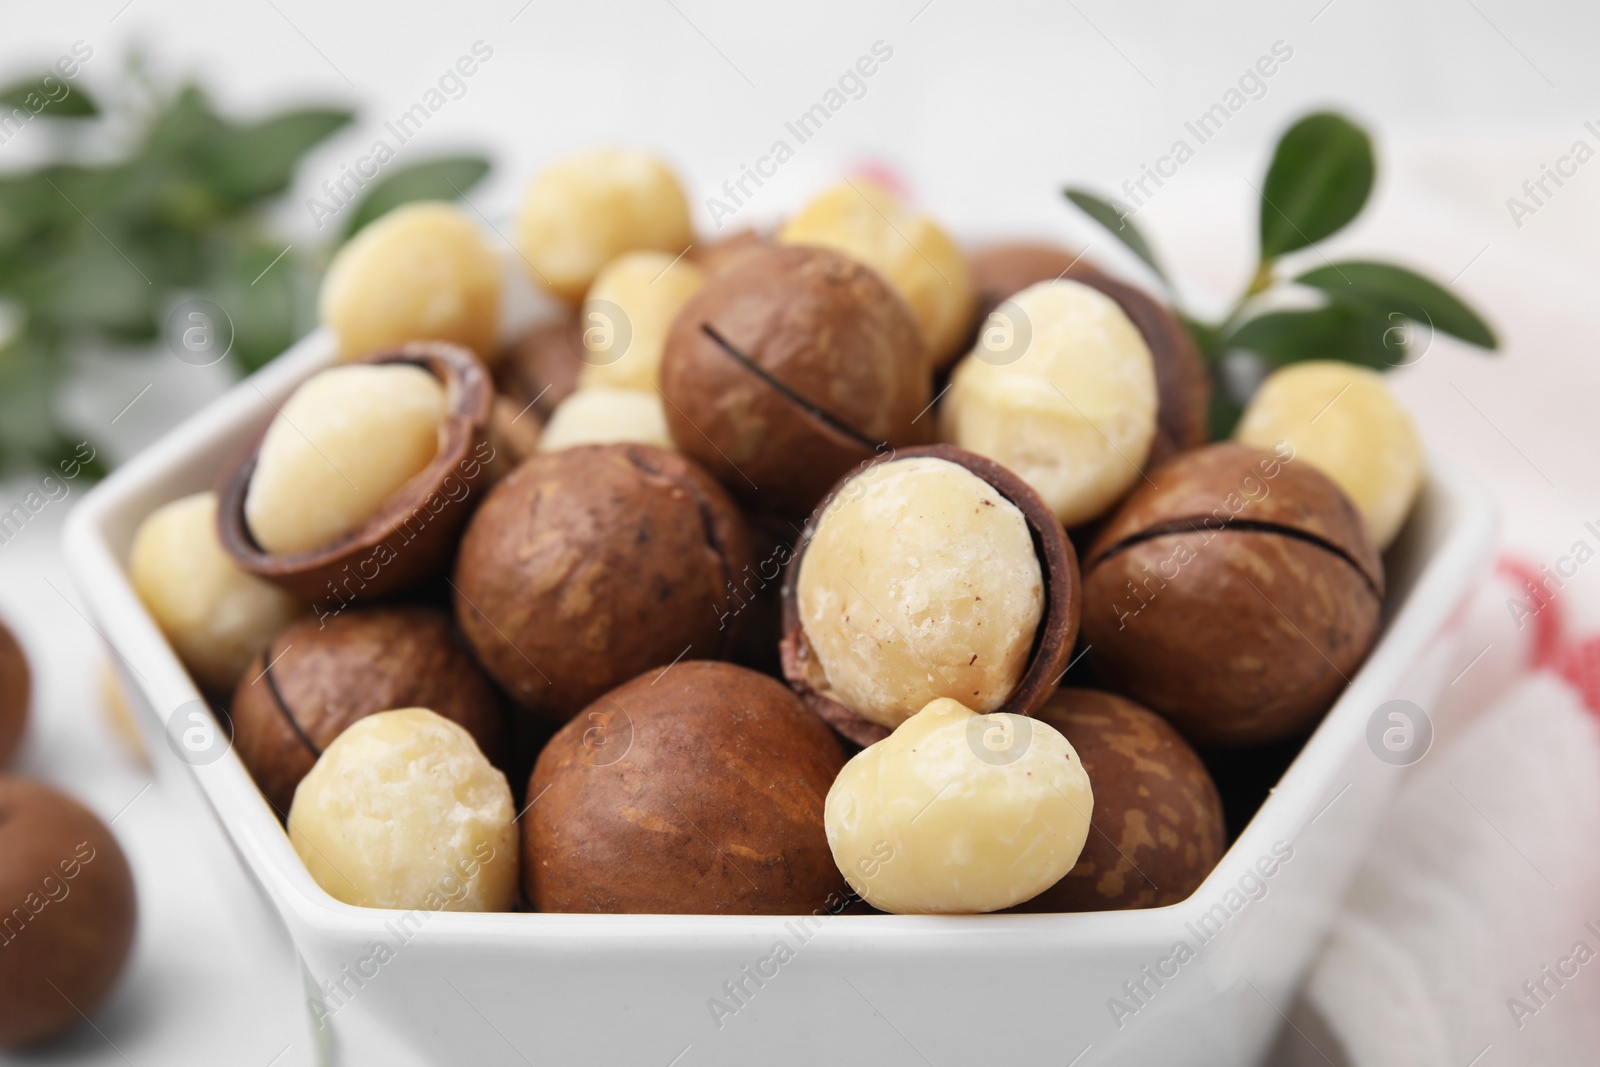 Photo of Tasty Macadamia nuts in bowl, closeup view